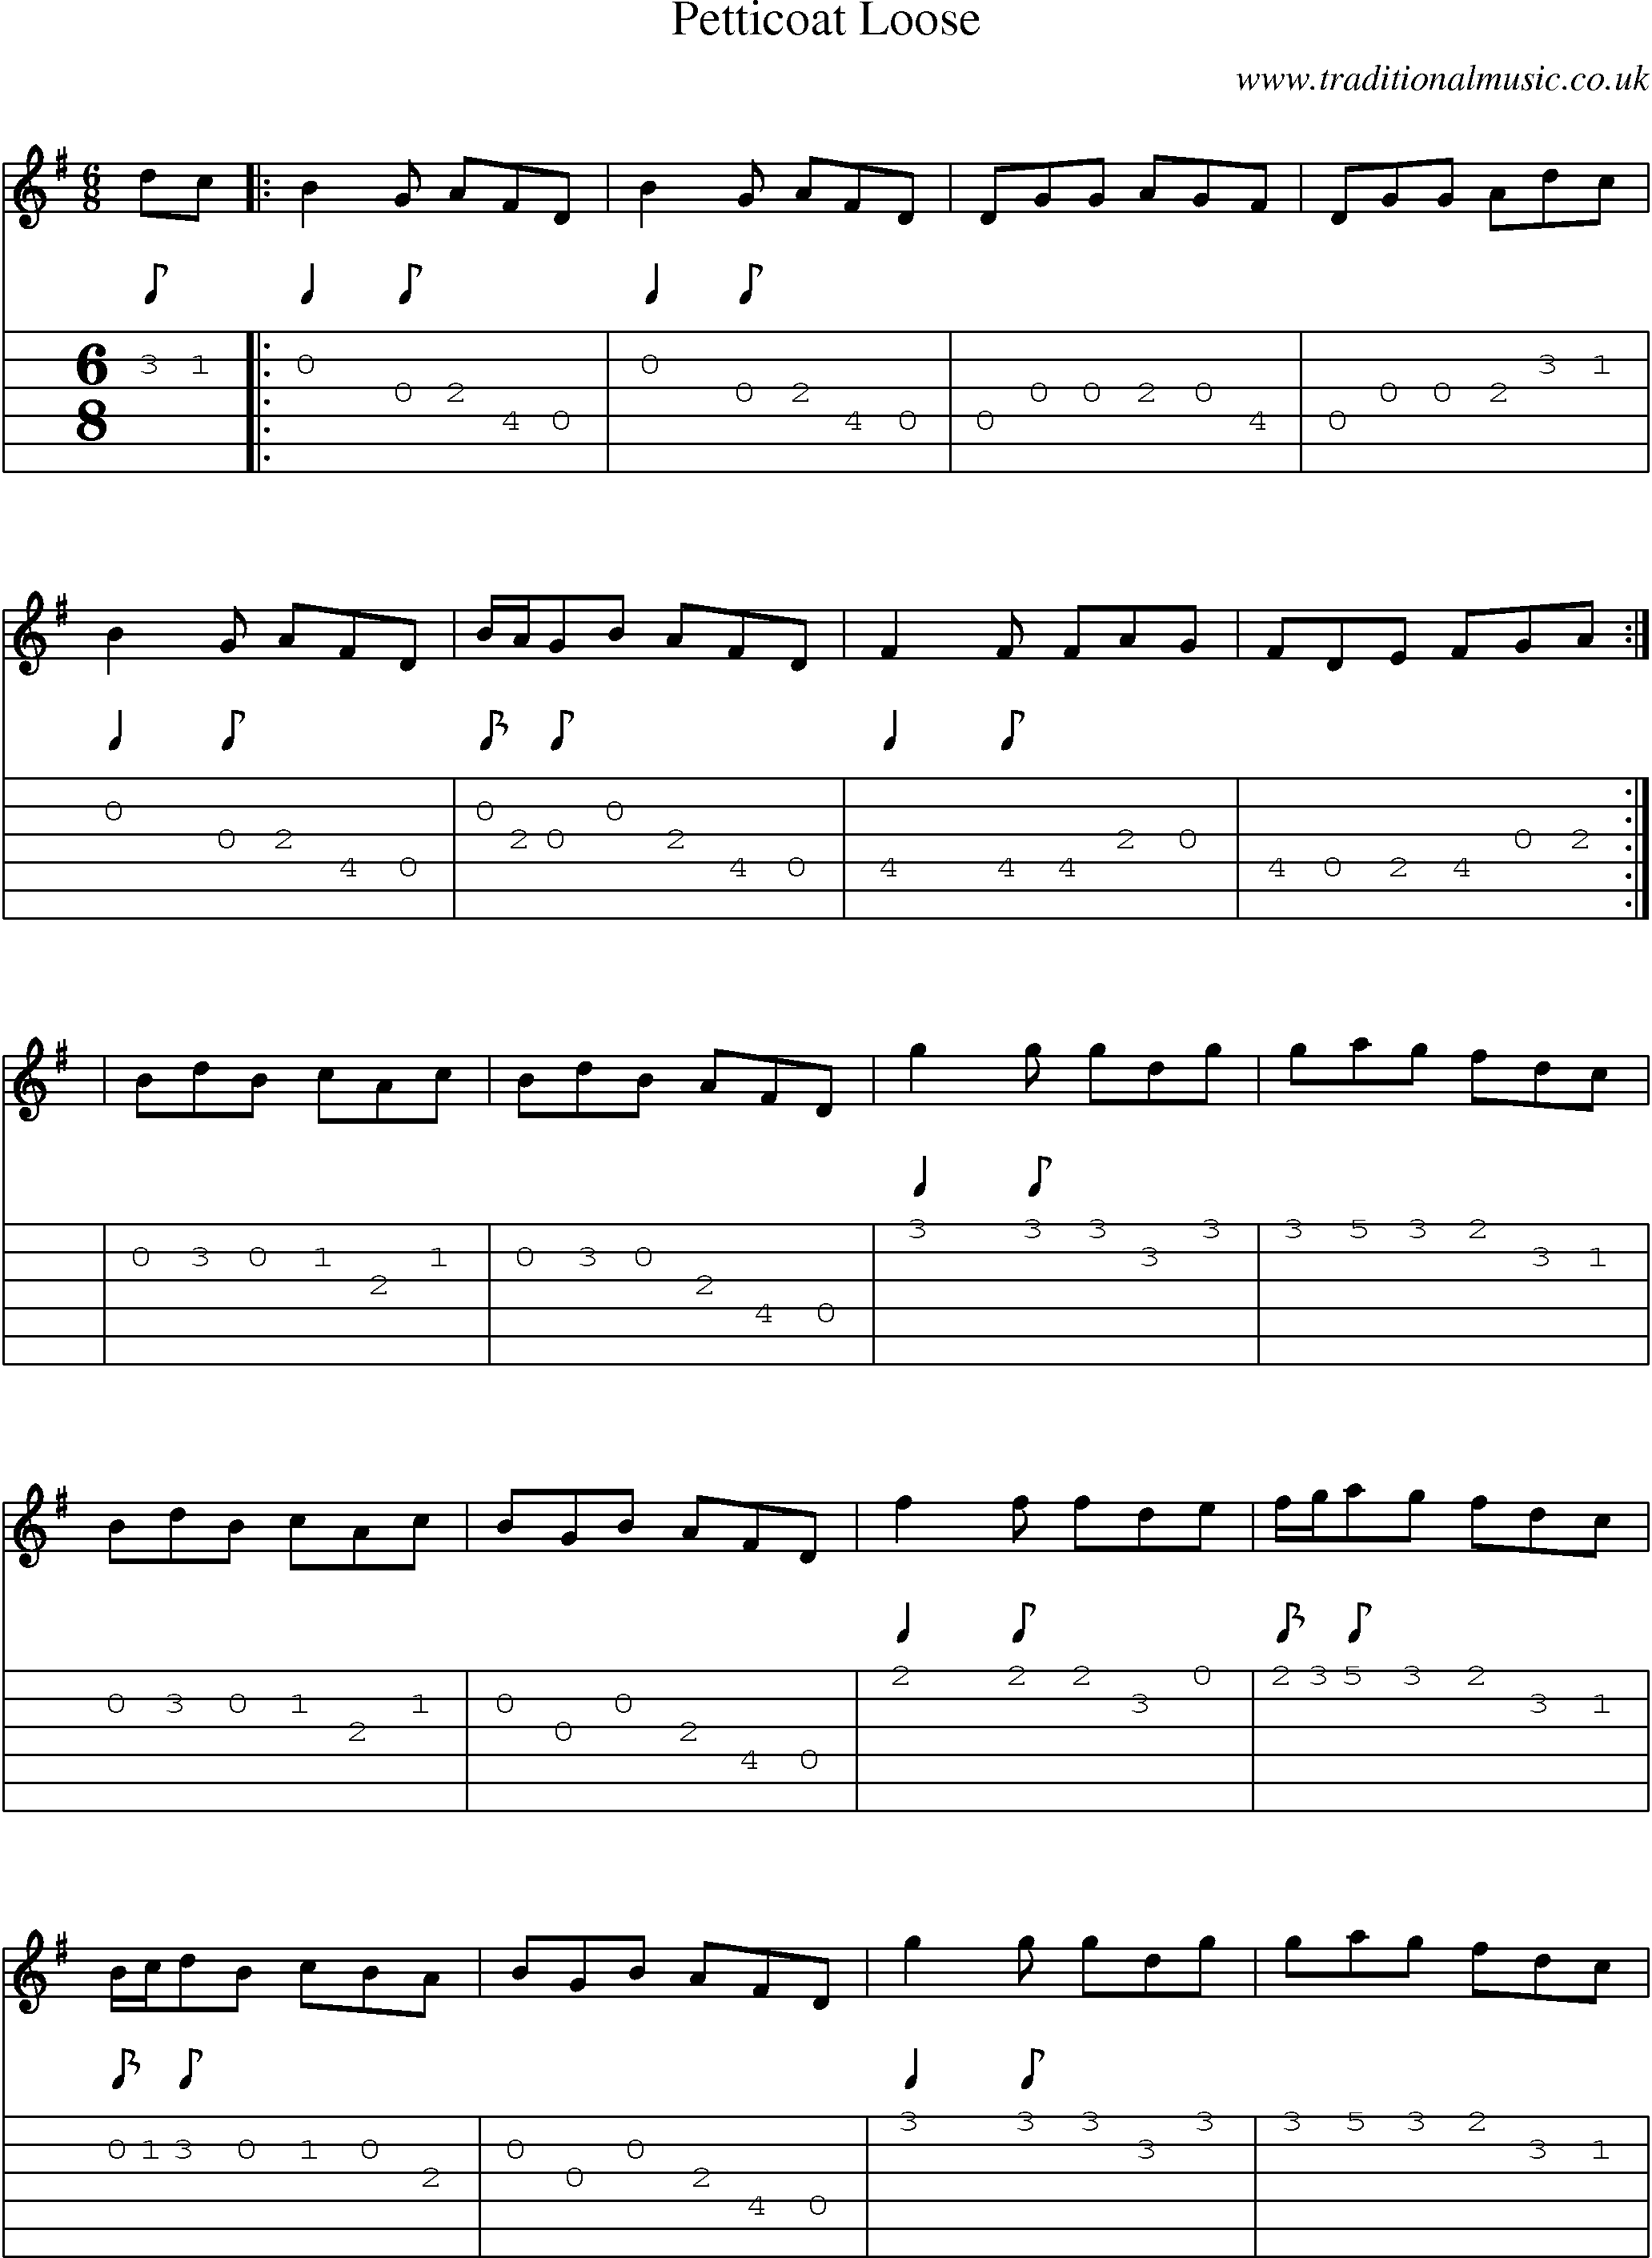 Music Score and Guitar Tabs for Petticoat Loose